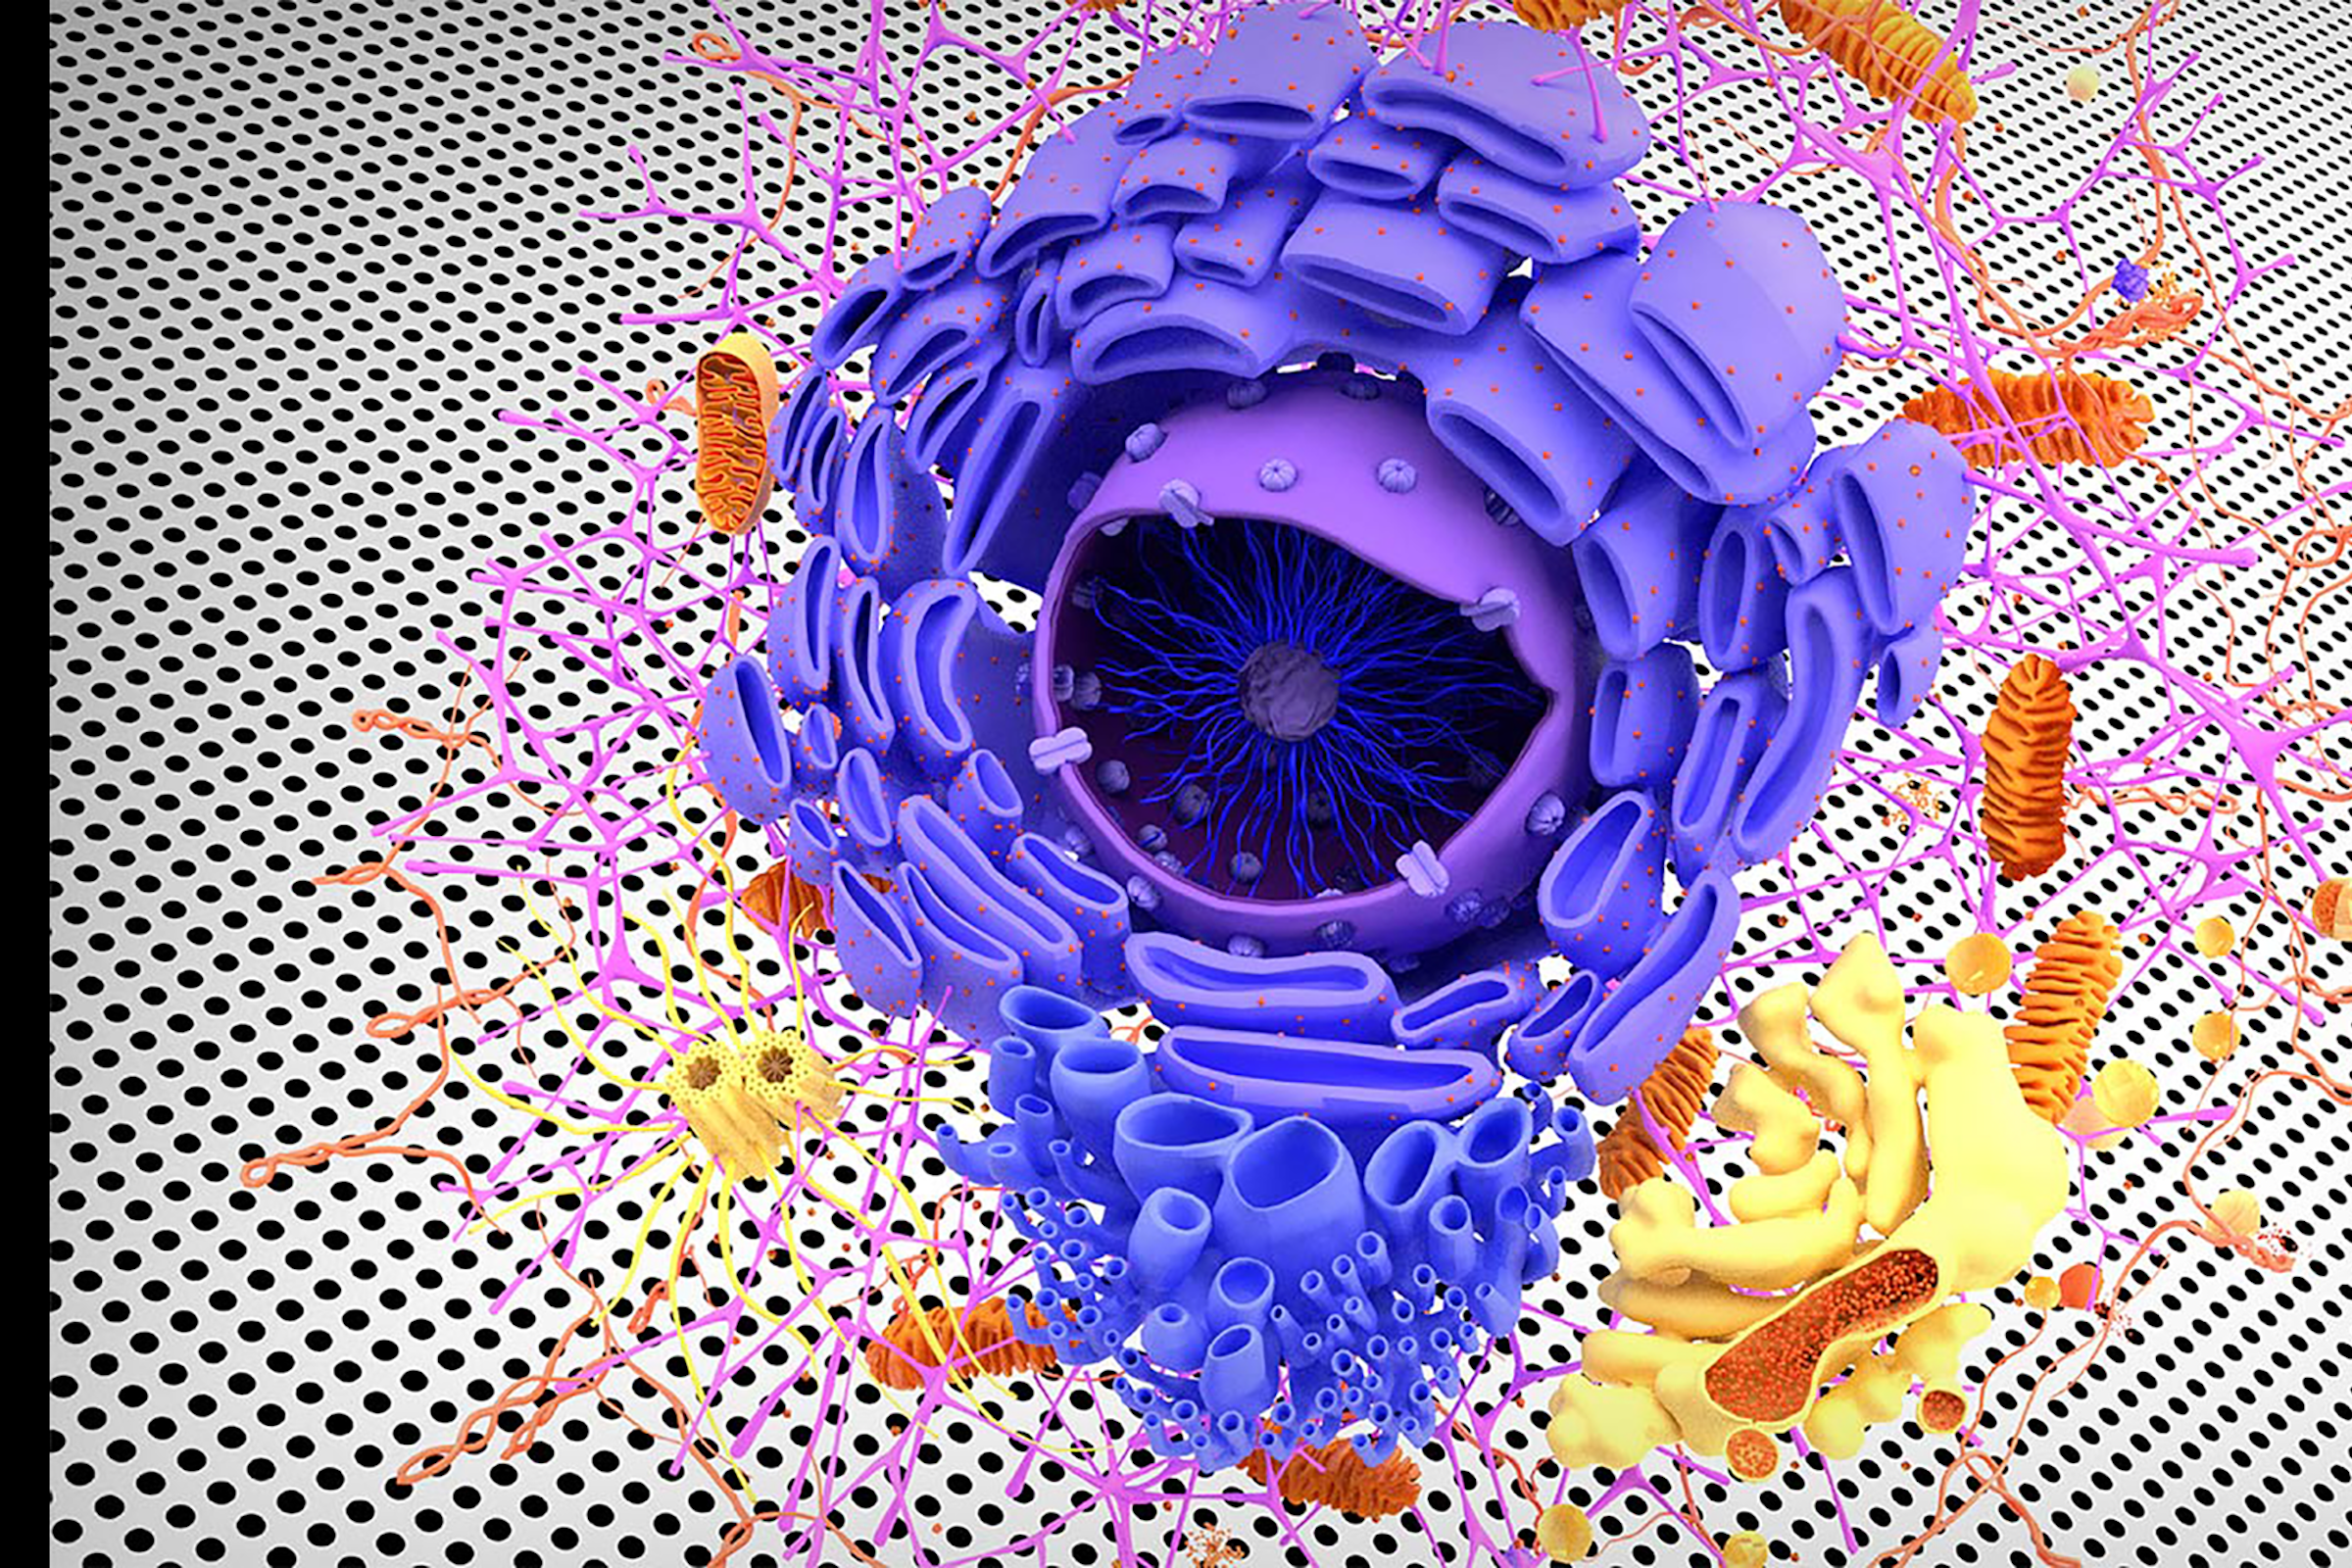 Illustration of a biological cell